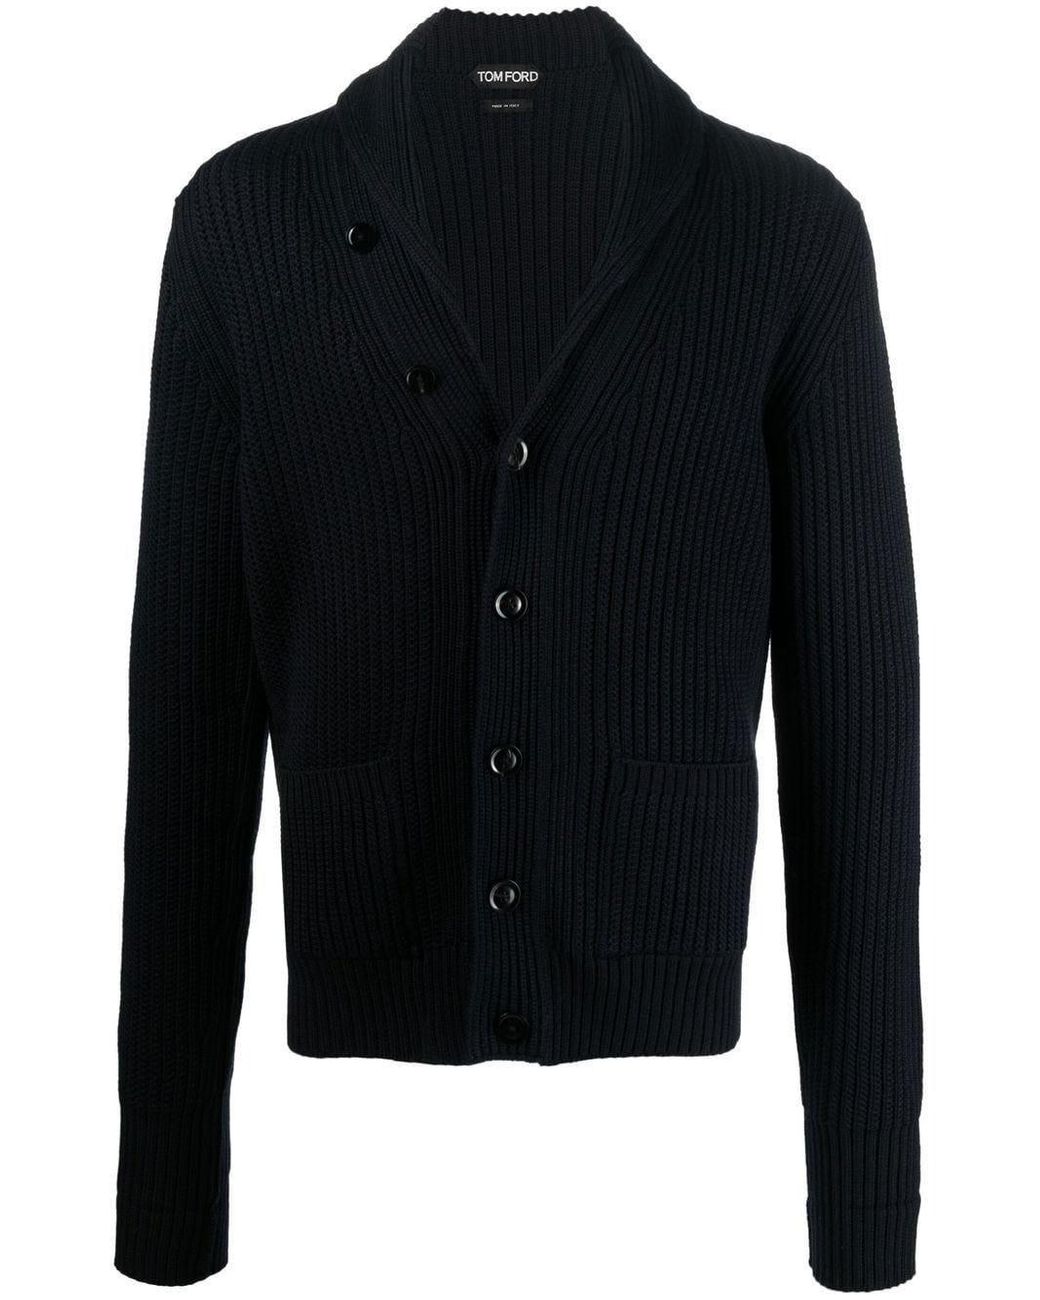 Tom Ford Black Ribbed Cardigan With Buttons | Lyst